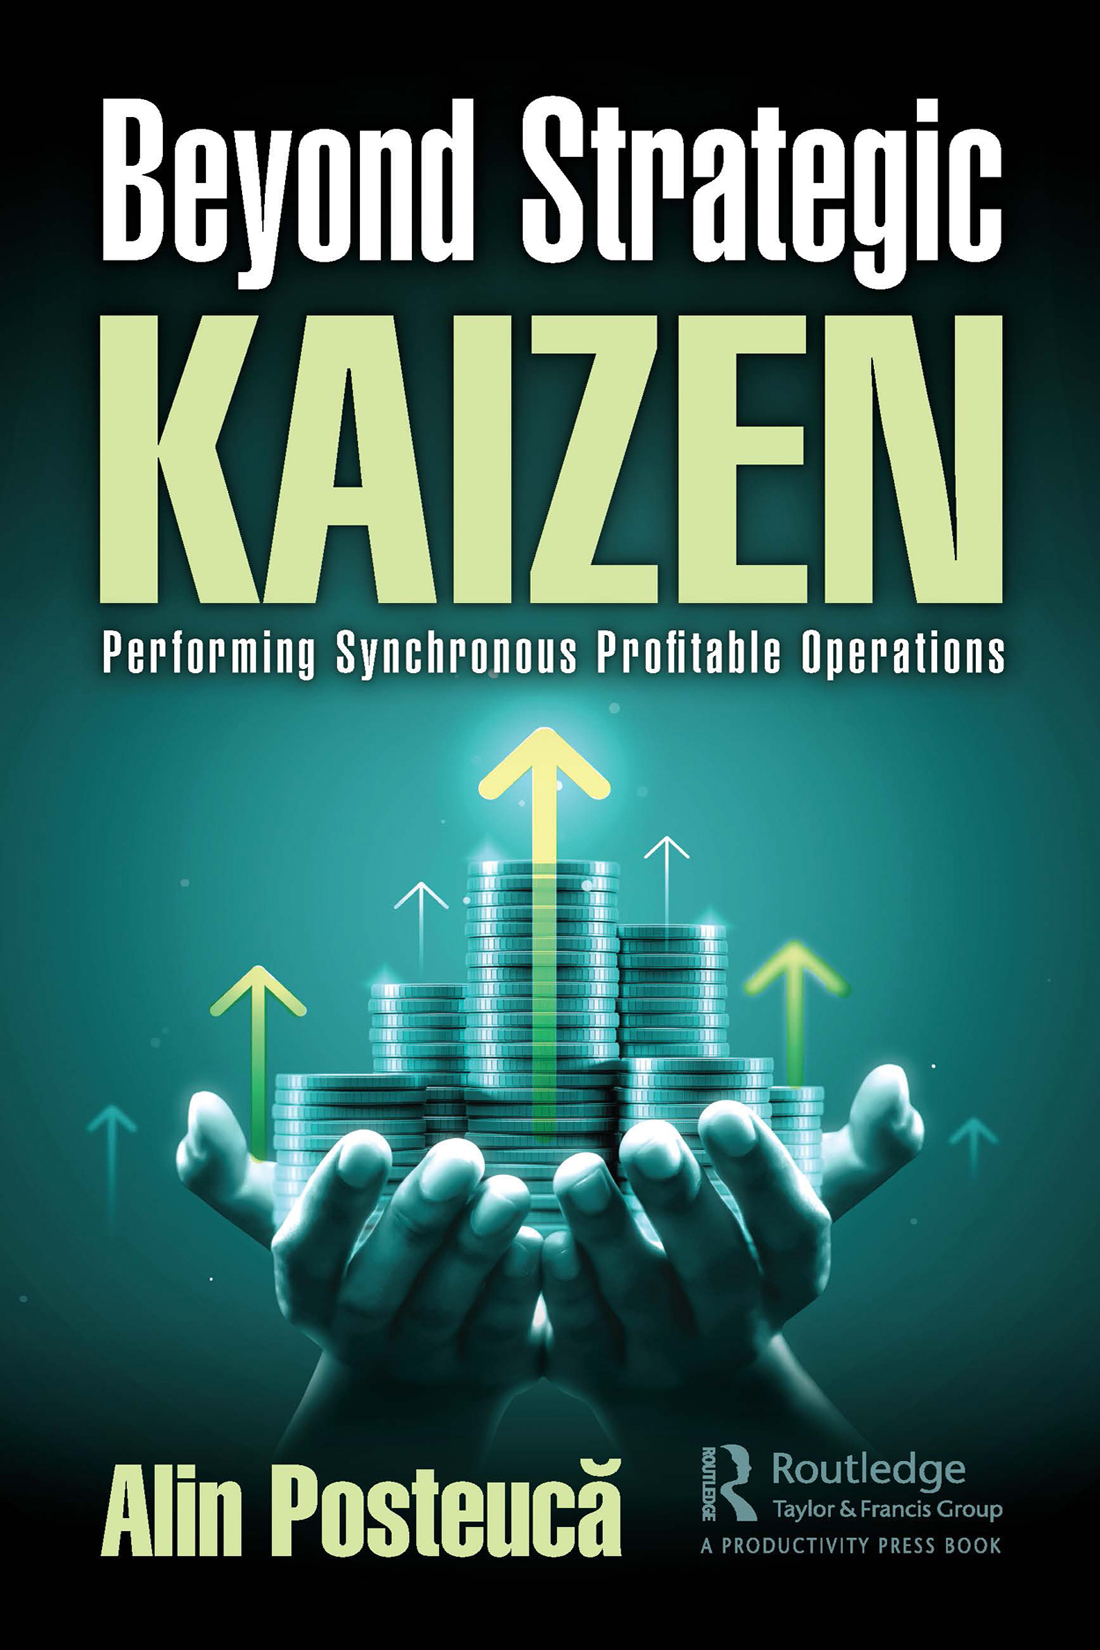 Cover: Beyond Strategic Kaizen, Edited by Alin Posteucă, published by Routledge is an imprint of the Taylor & Francis Group, an informa business